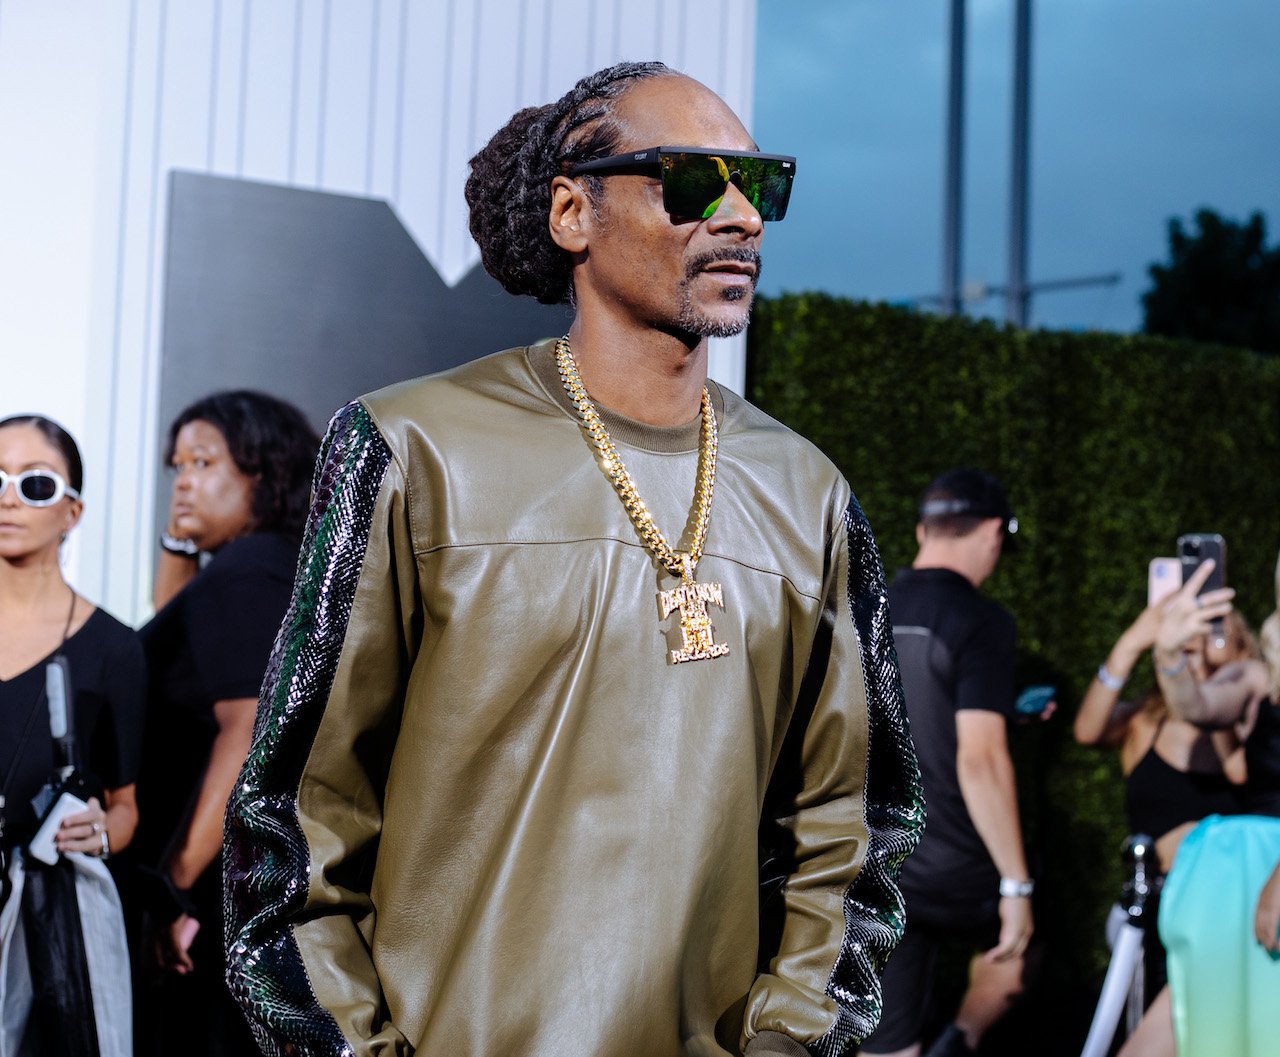 Snoop Dogg poses at the 2022 VMAs;  Snoop headlines a music festival gig with fellow West Coast artists